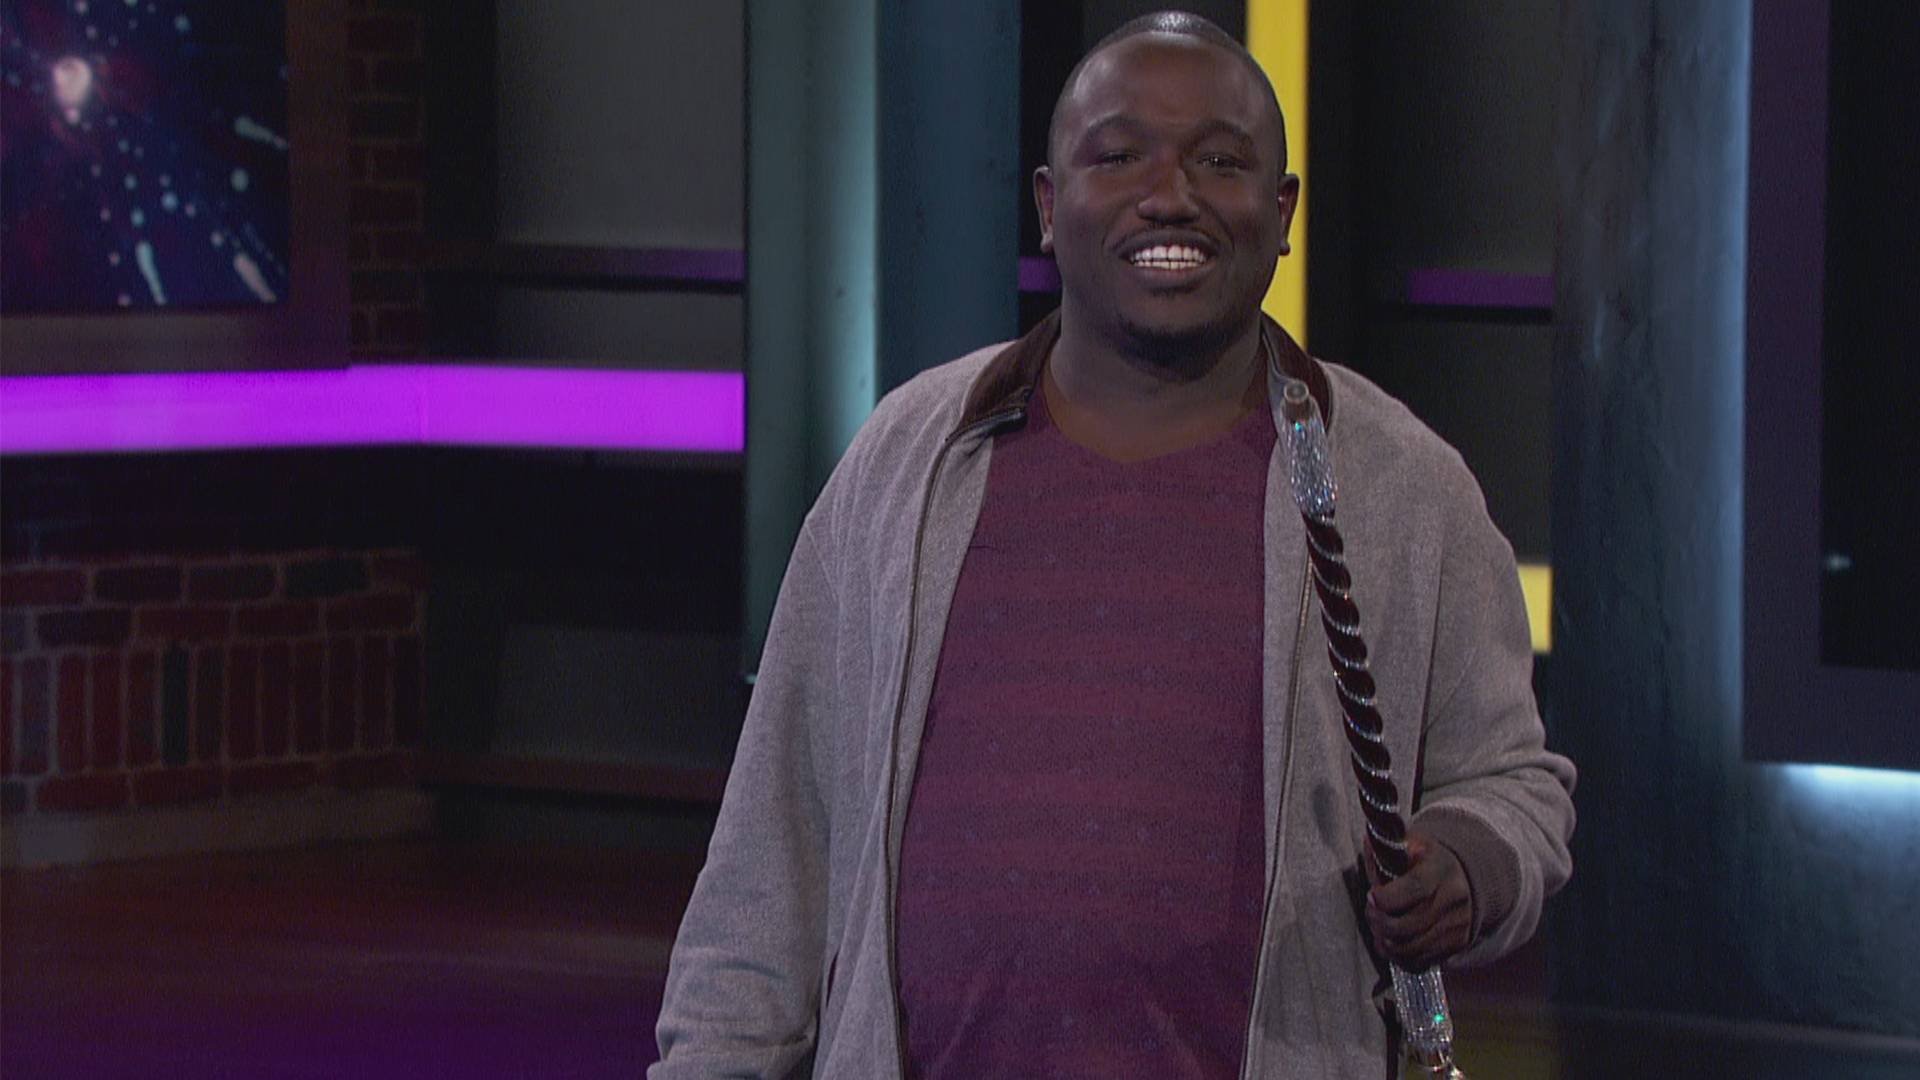 Why? with Hannibal Burress | E 102 | 16:9 | 1920x1080